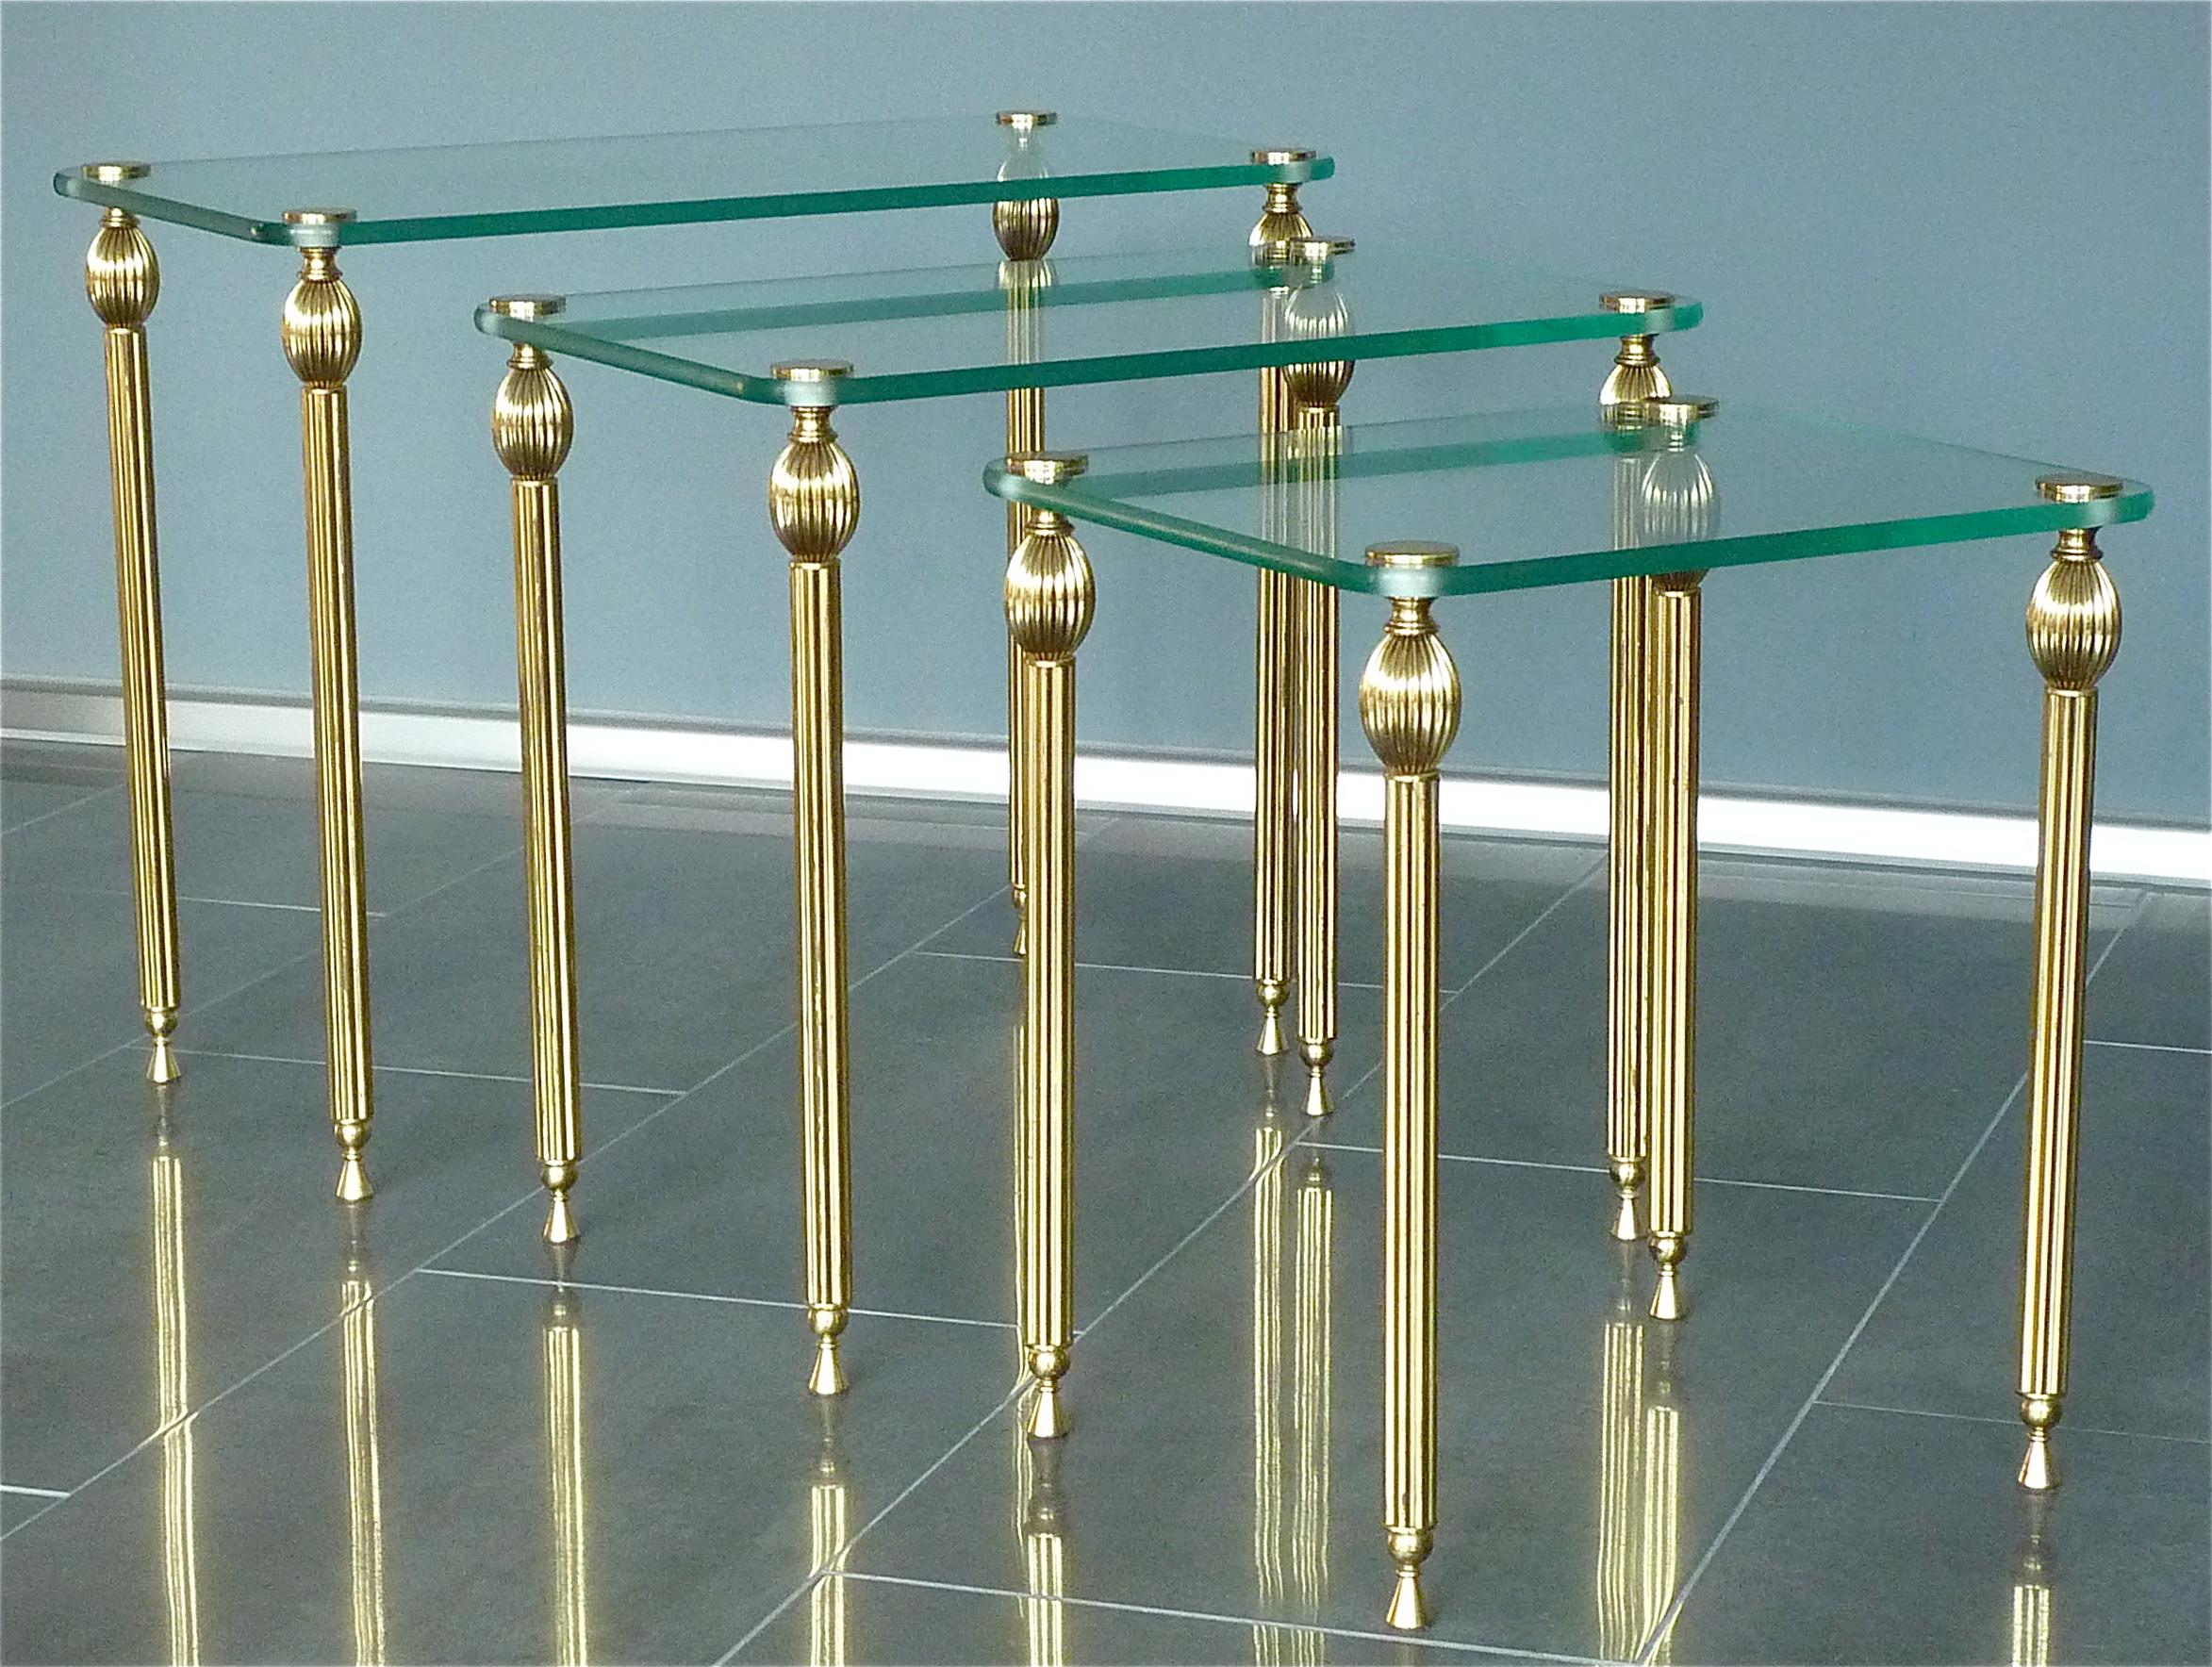 A beautiful set of three Midcentury nesting or side tables in patinated brass with slightly green tinted glass table tops made most probably by Maison Baguès or Jansen, France, circa 1955.
Dimensions of the tables:
Large: 44 cm / 17.32 inches